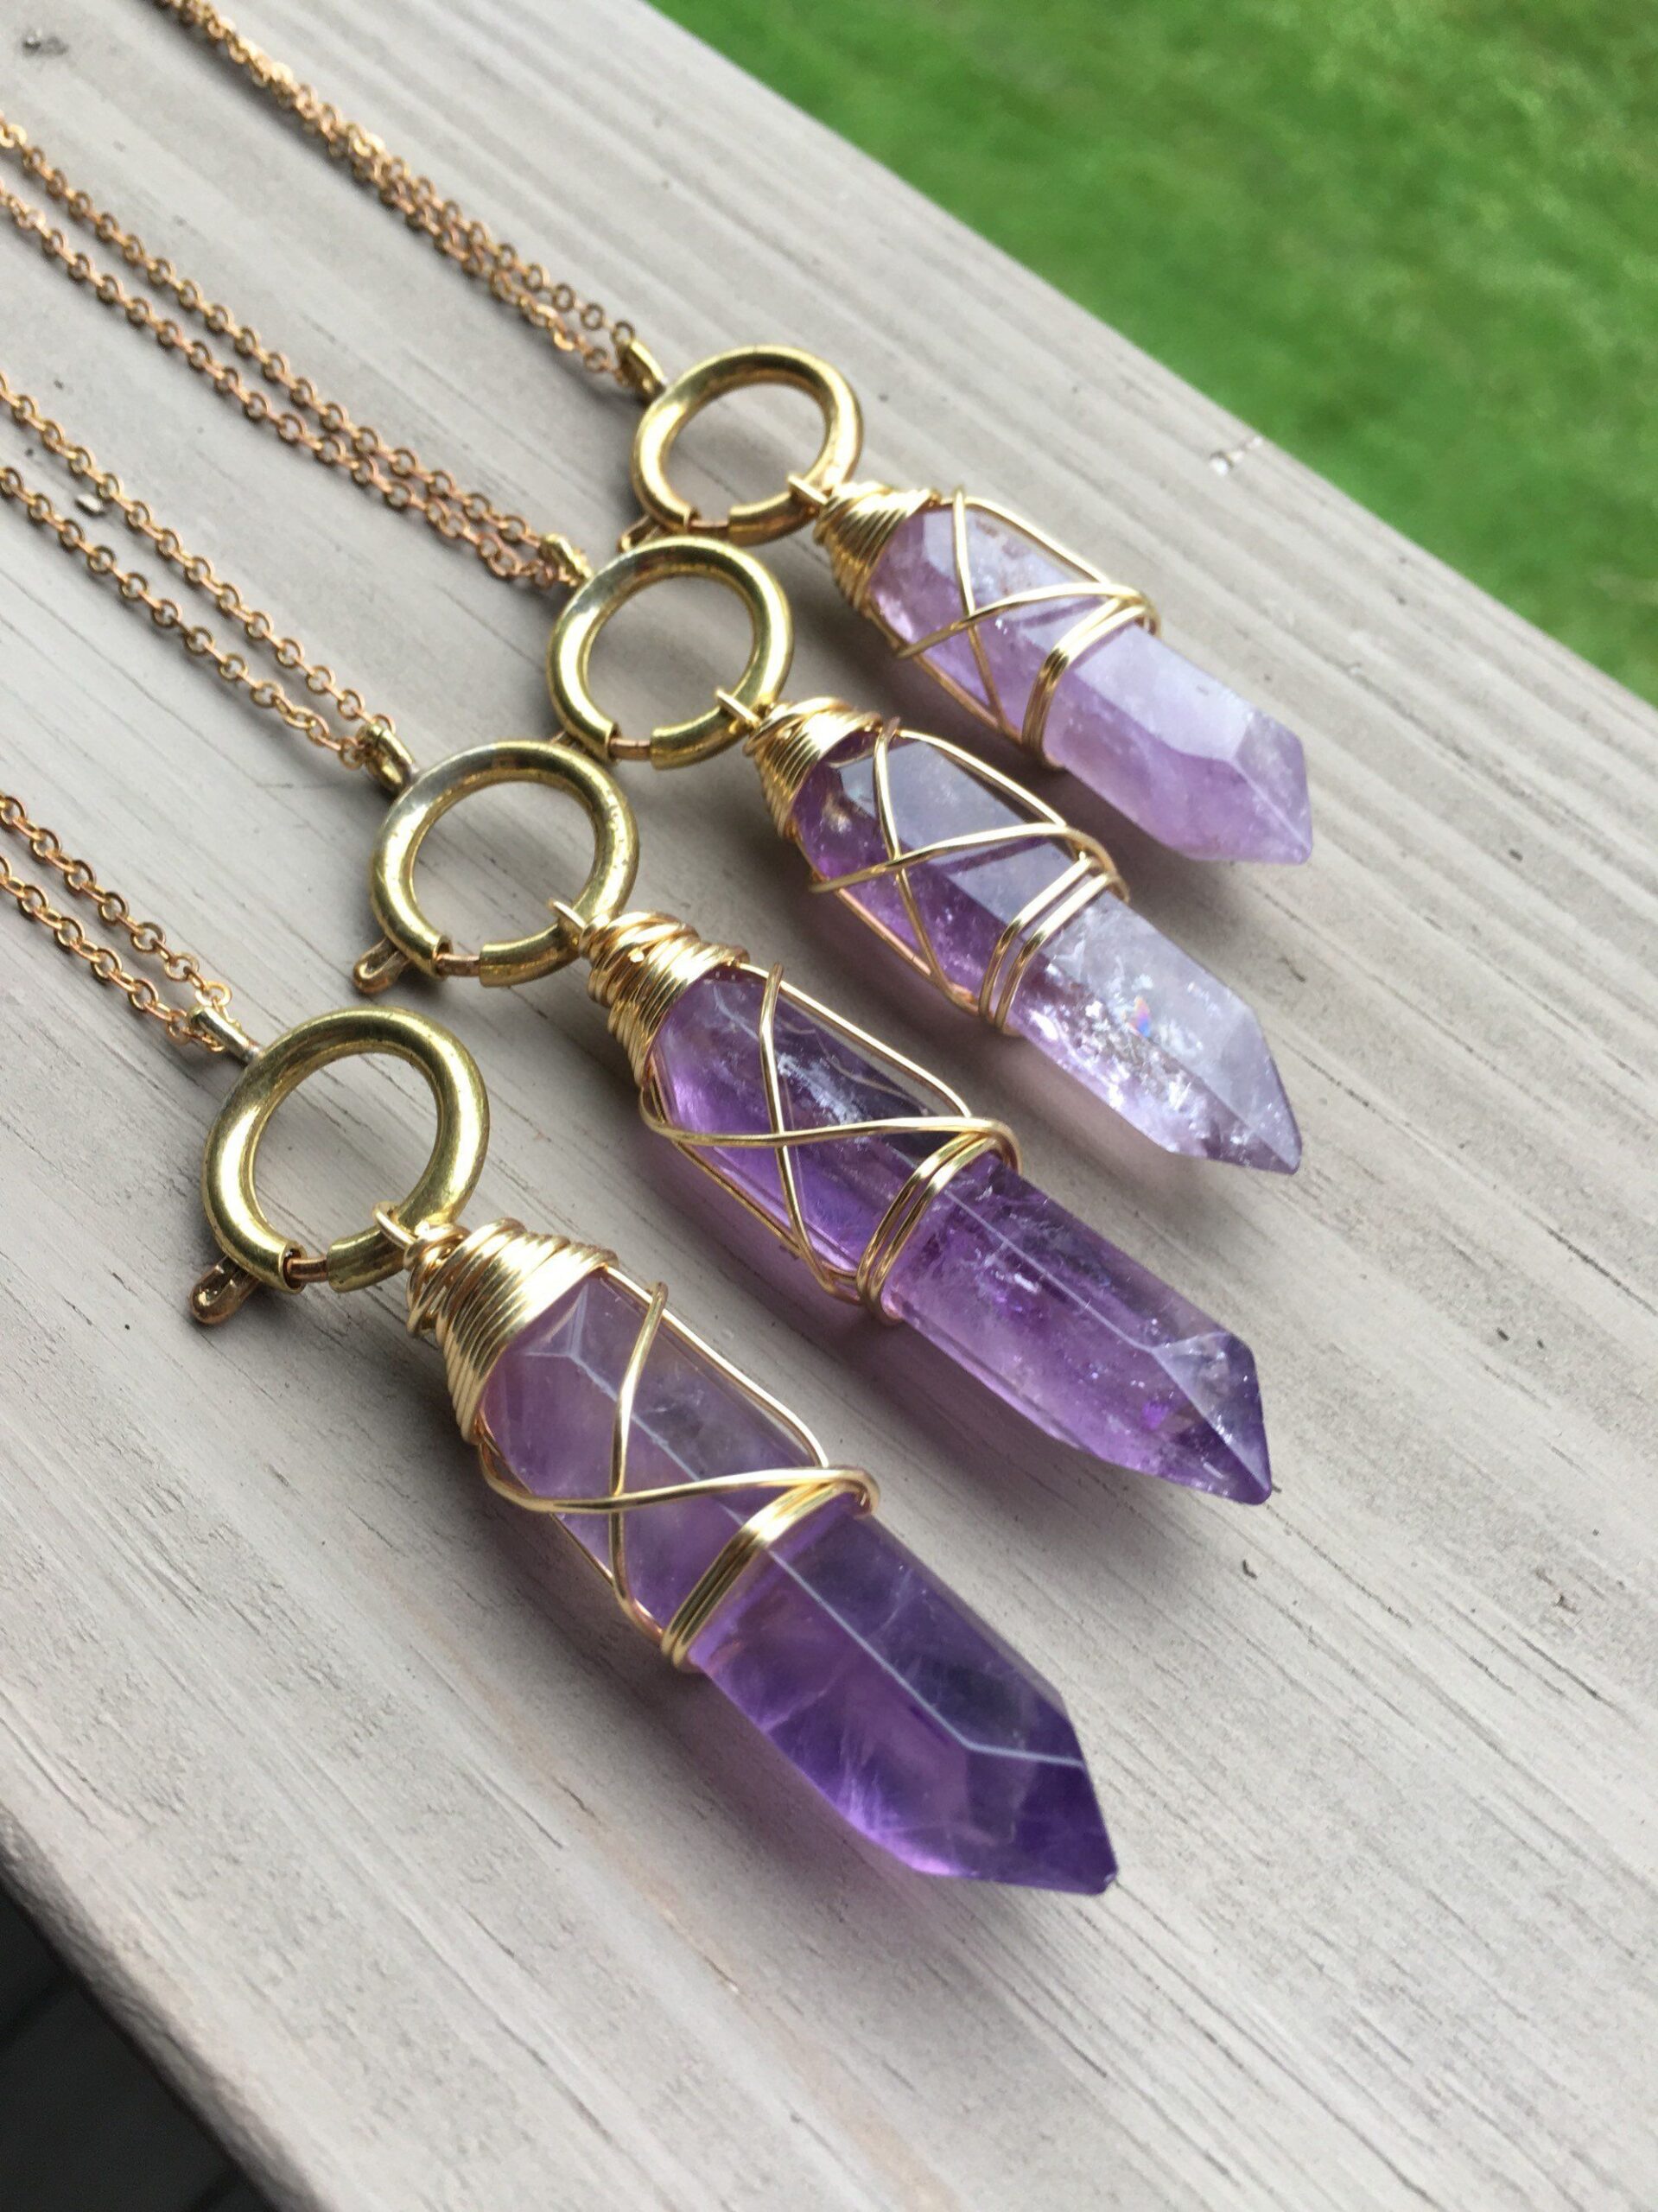 Stunning Amethyst Necklaces for a Pop of
Color